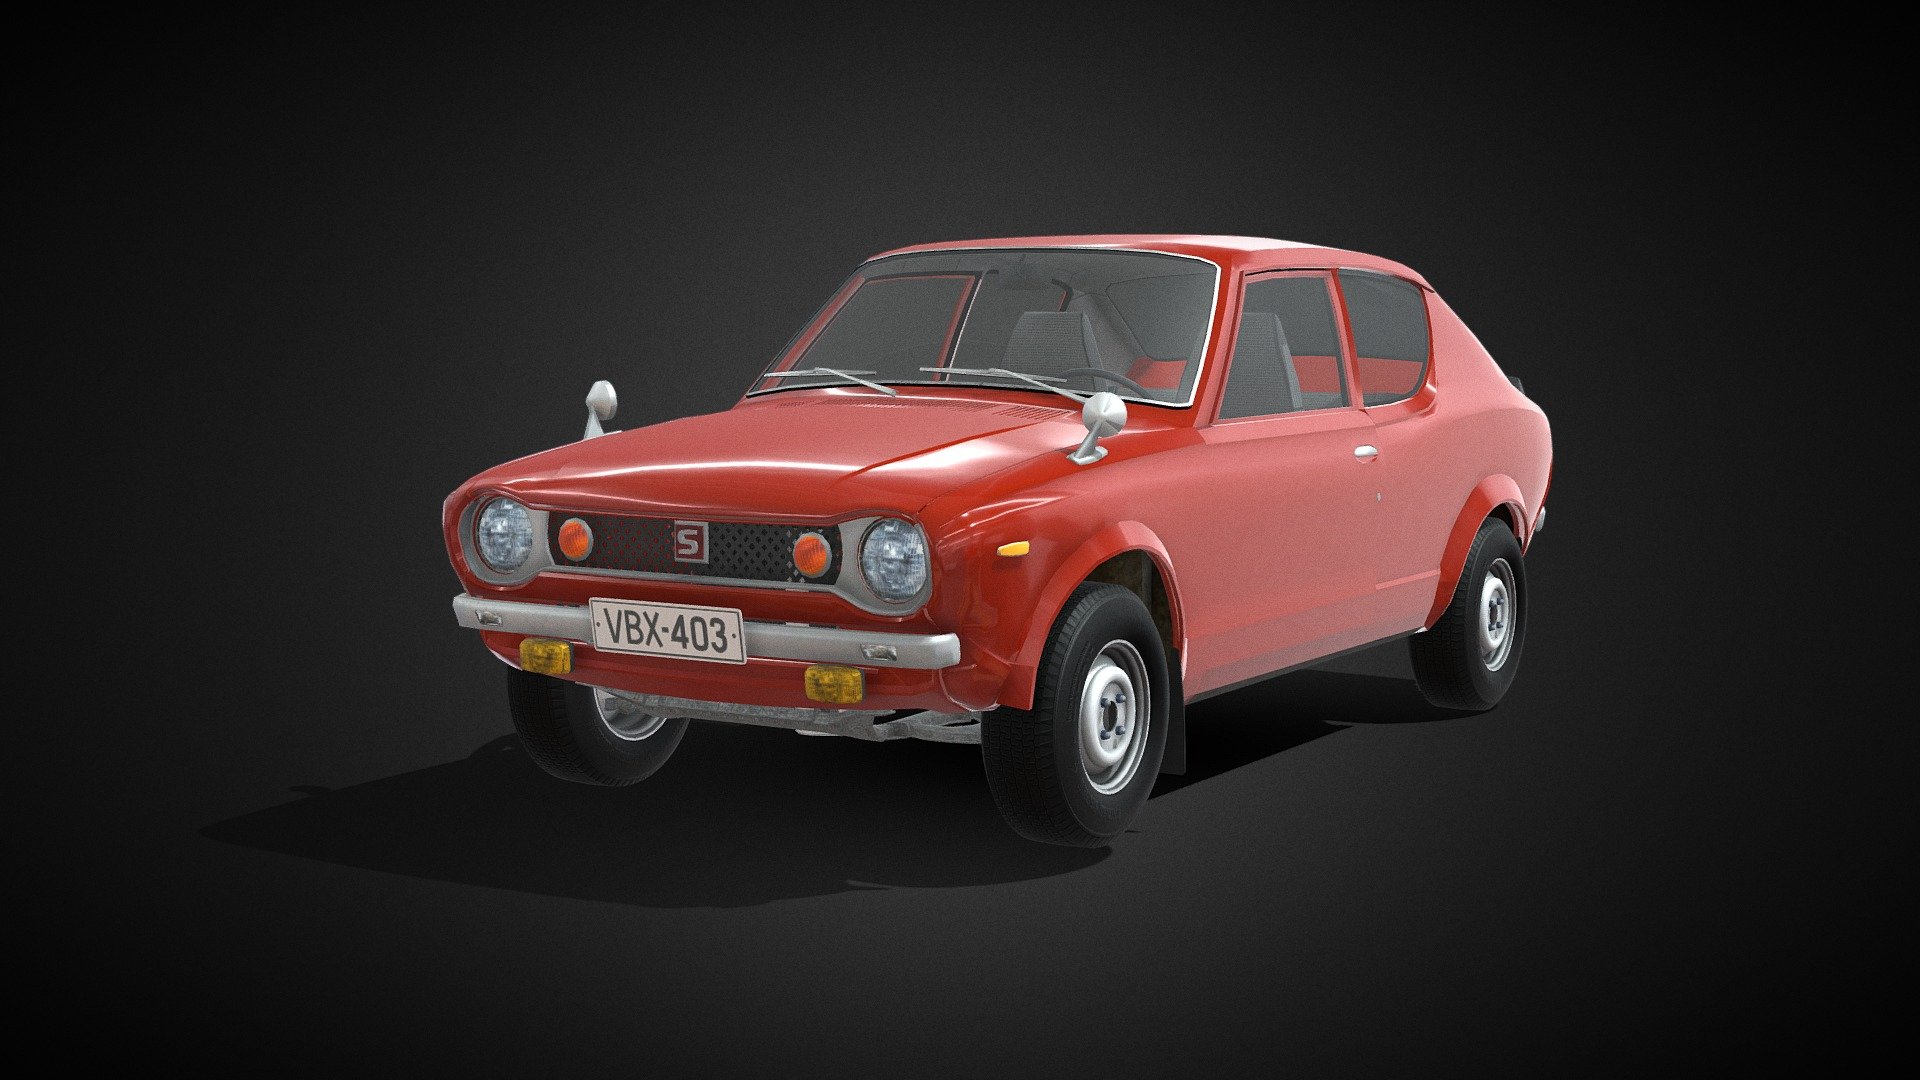 Nissan Cherry/Datsun 100A. The Datsun Cherry, known later as the Nissan Cherry, was a series of subcompact cars which formed Nissan’s first front-wheel drive supermini model line 3d model